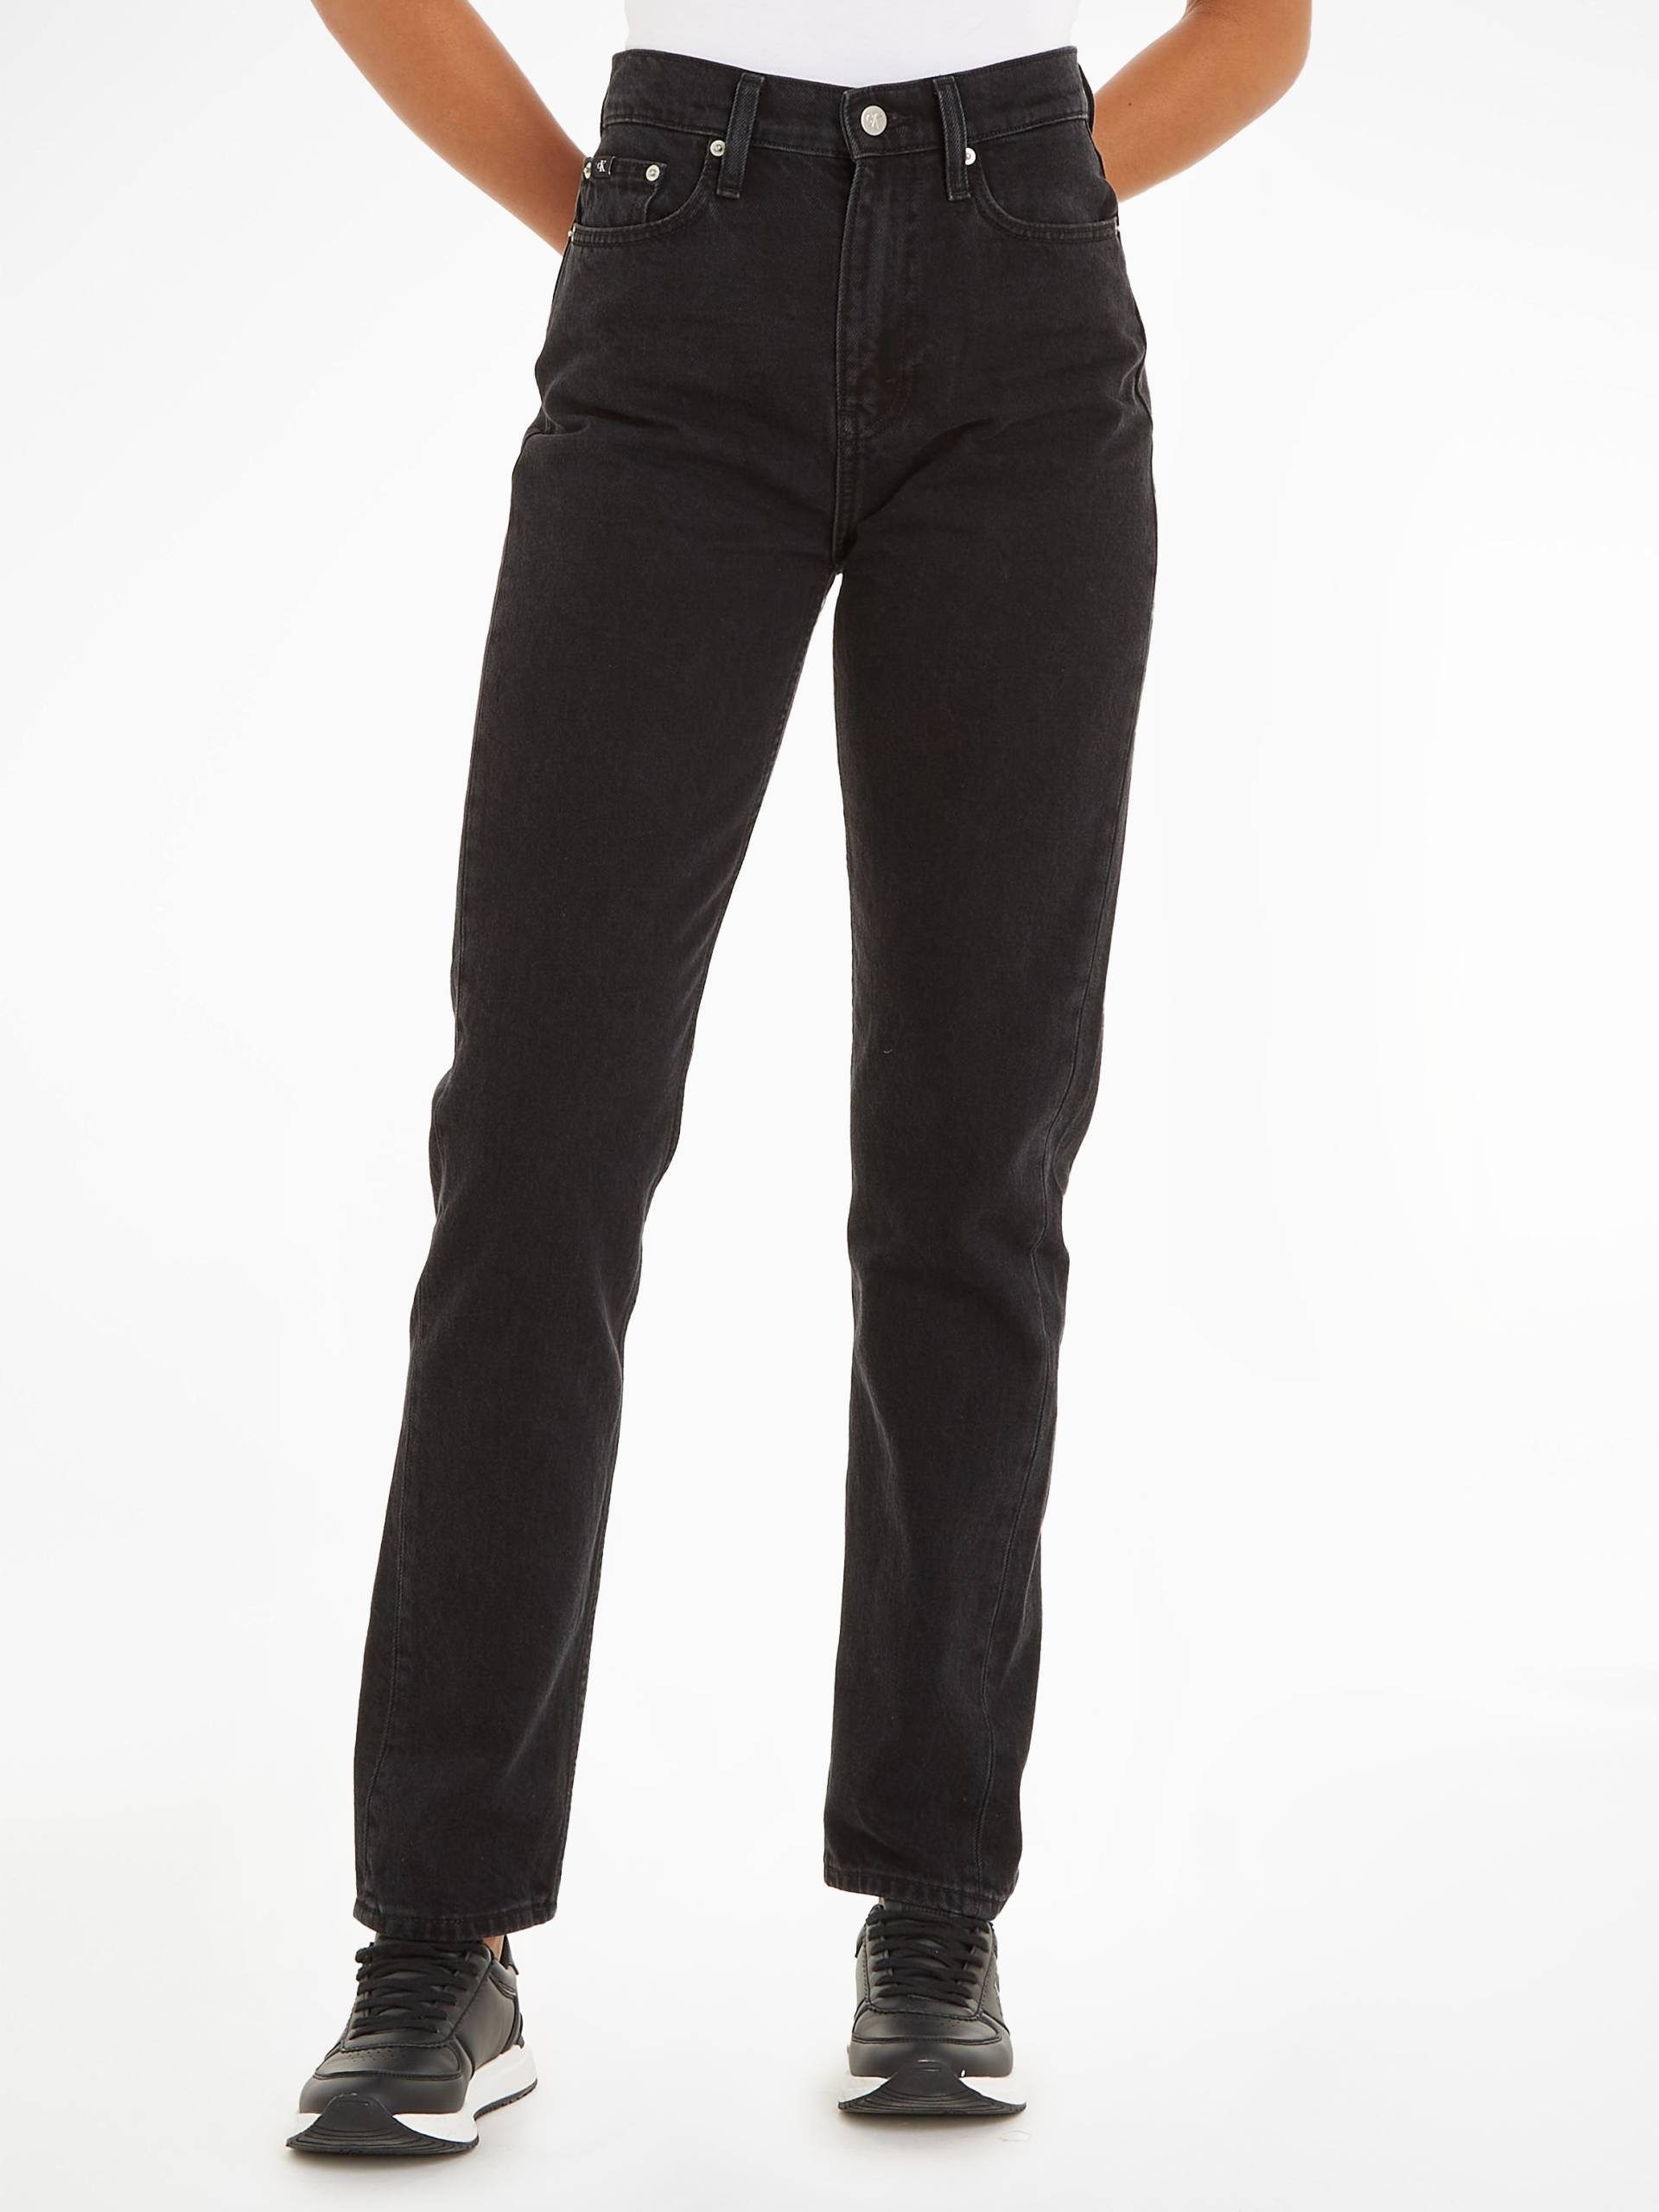 Calvin Klein Jeans Straight-Jeans »AUTHENTIC SLIM STRAIGHT« von Calvin Klein Jeans